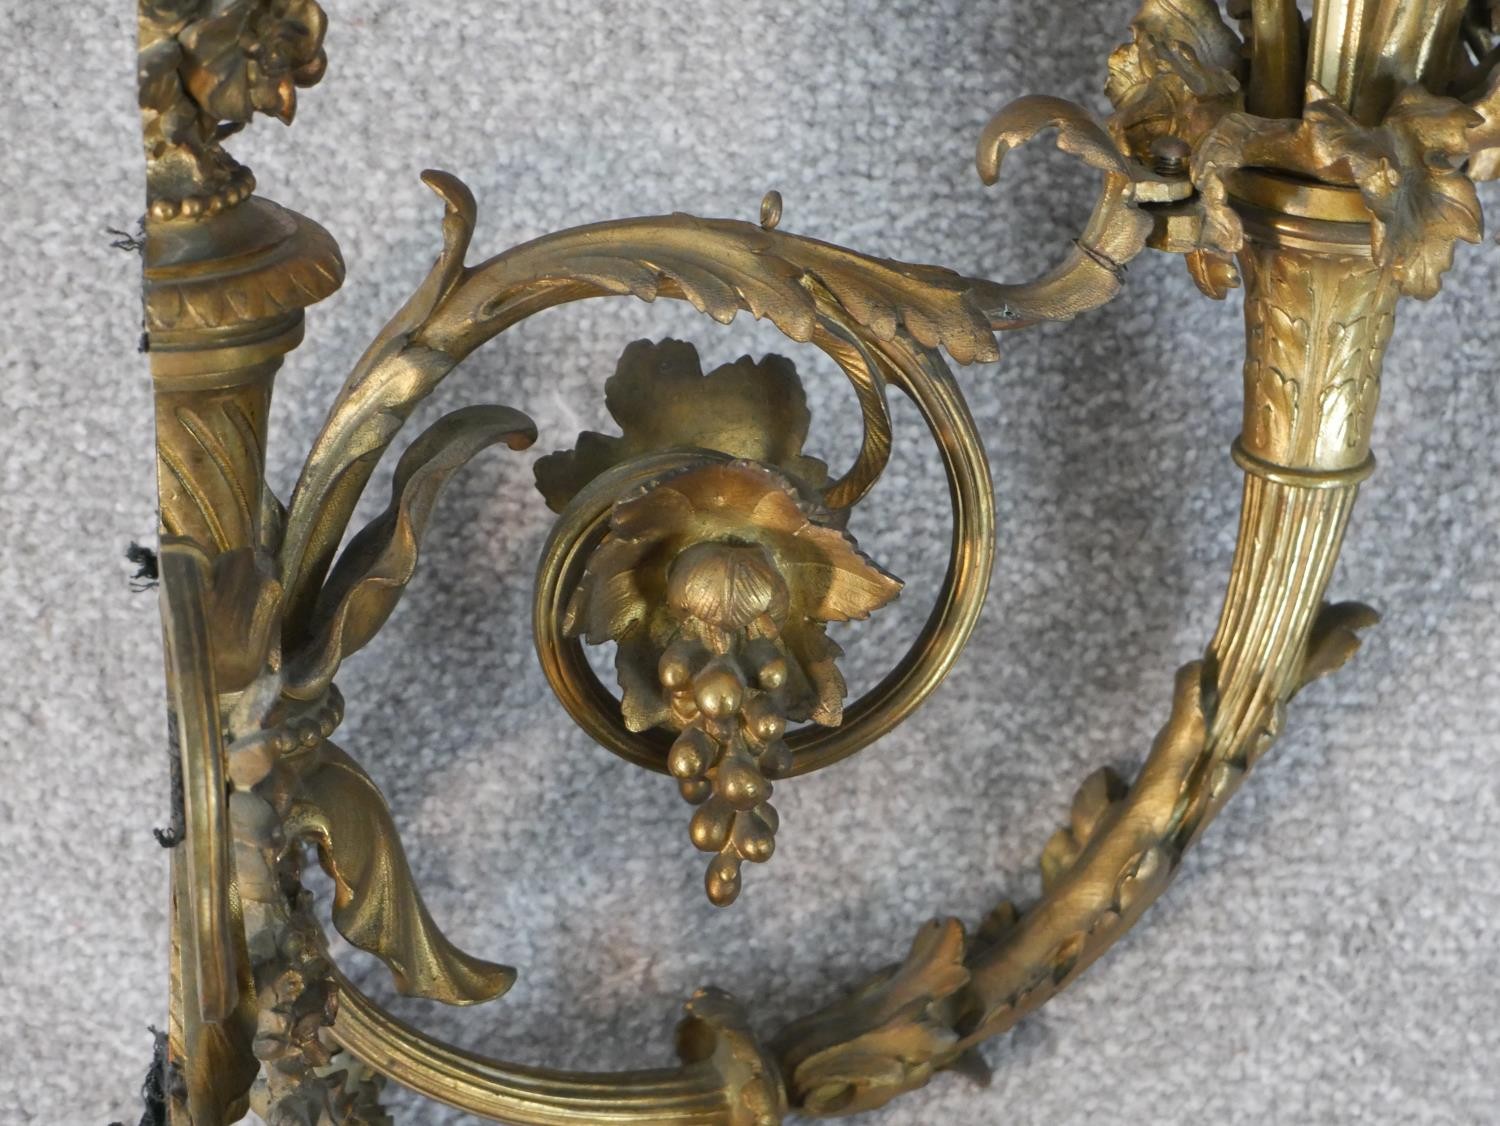 A late 19th century ormolu wall applique, the torch form wall mount hung with garlands of flowers - Image 8 of 8